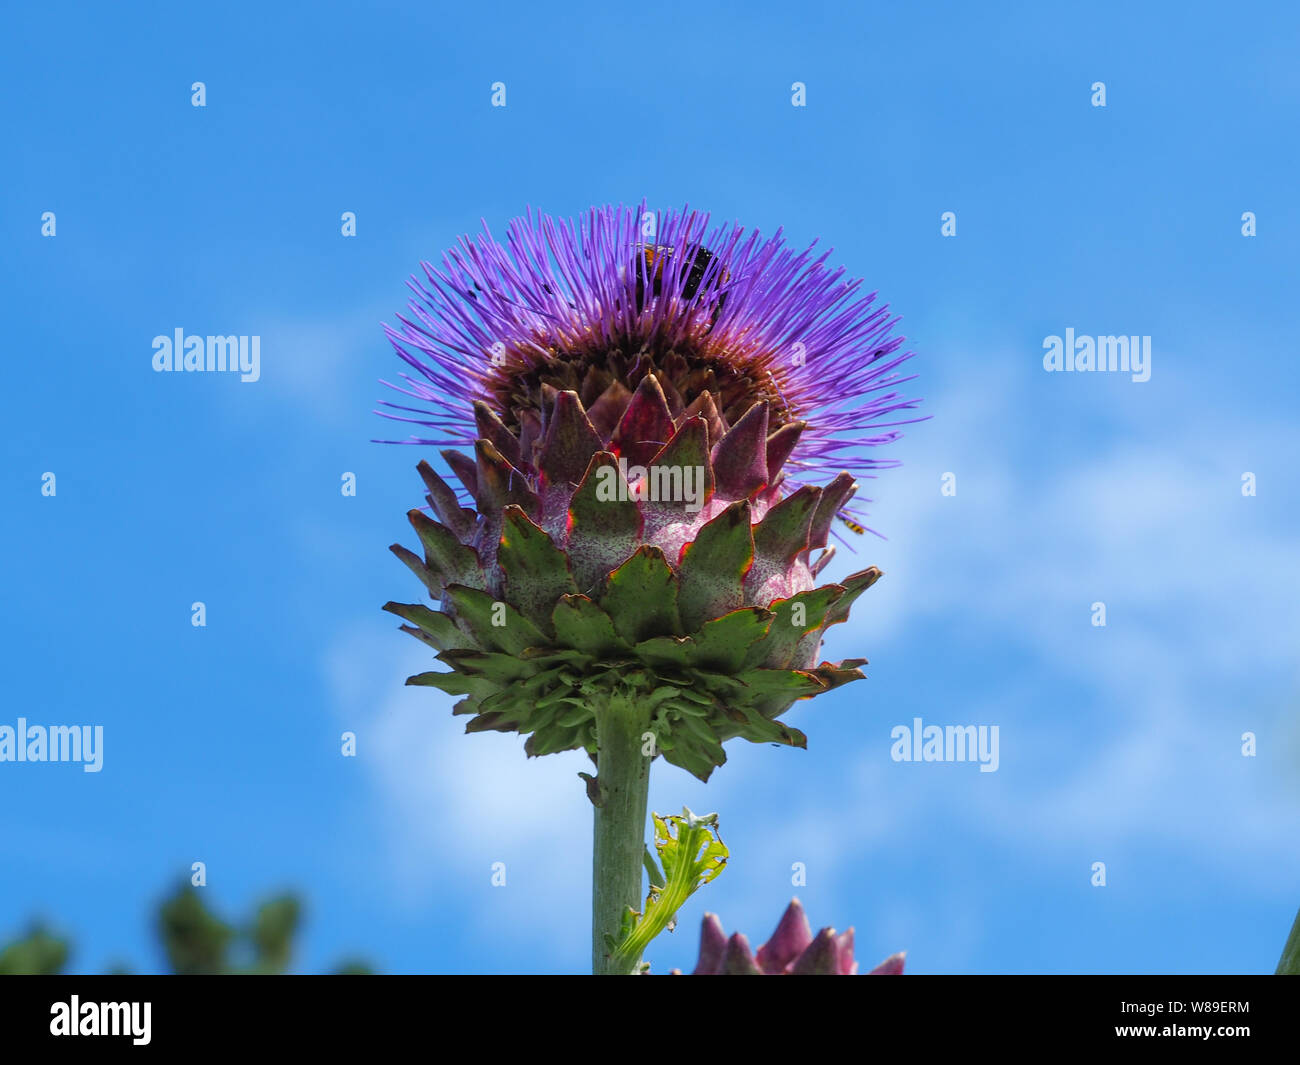 Tall impressive Cardoon flower with a bumblebee against a blue sky background Stock Photo